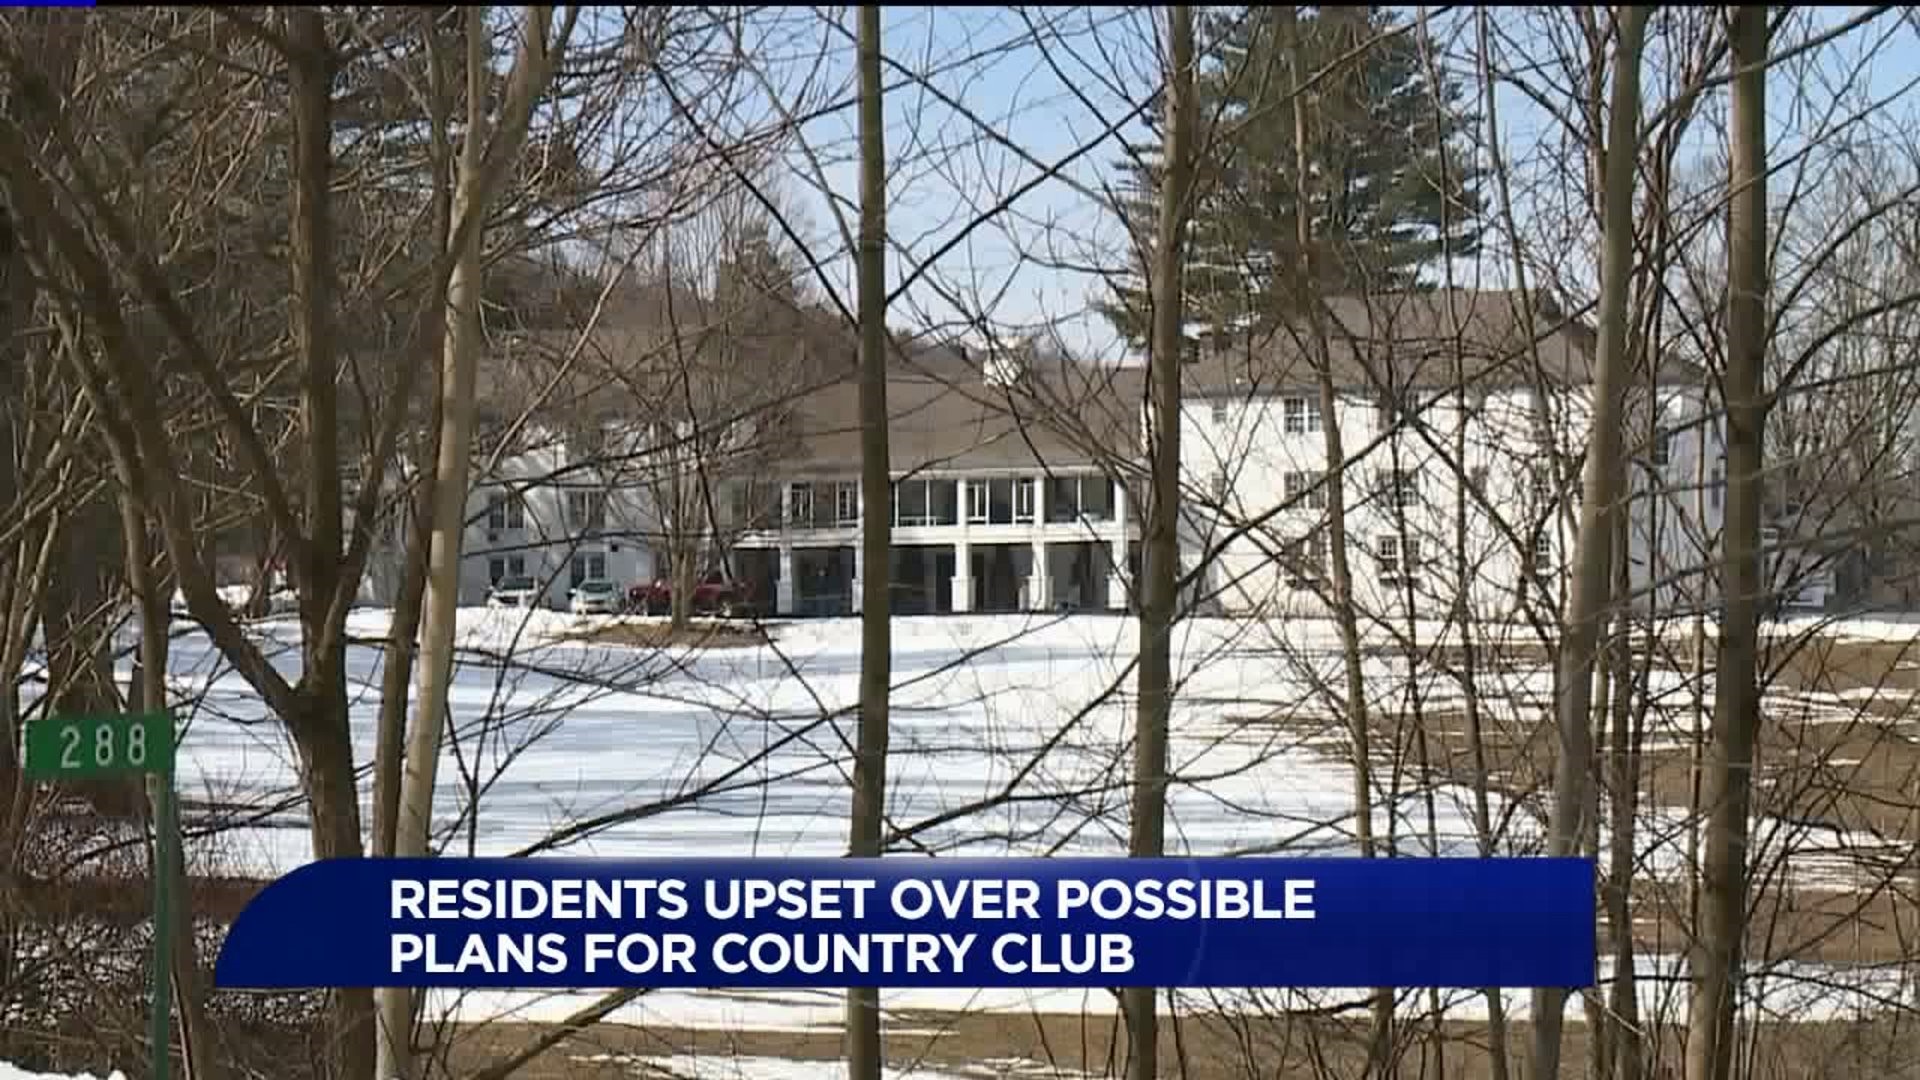 Residents Upset over Possible Plans to Turn Golf Course into Rehab Facility